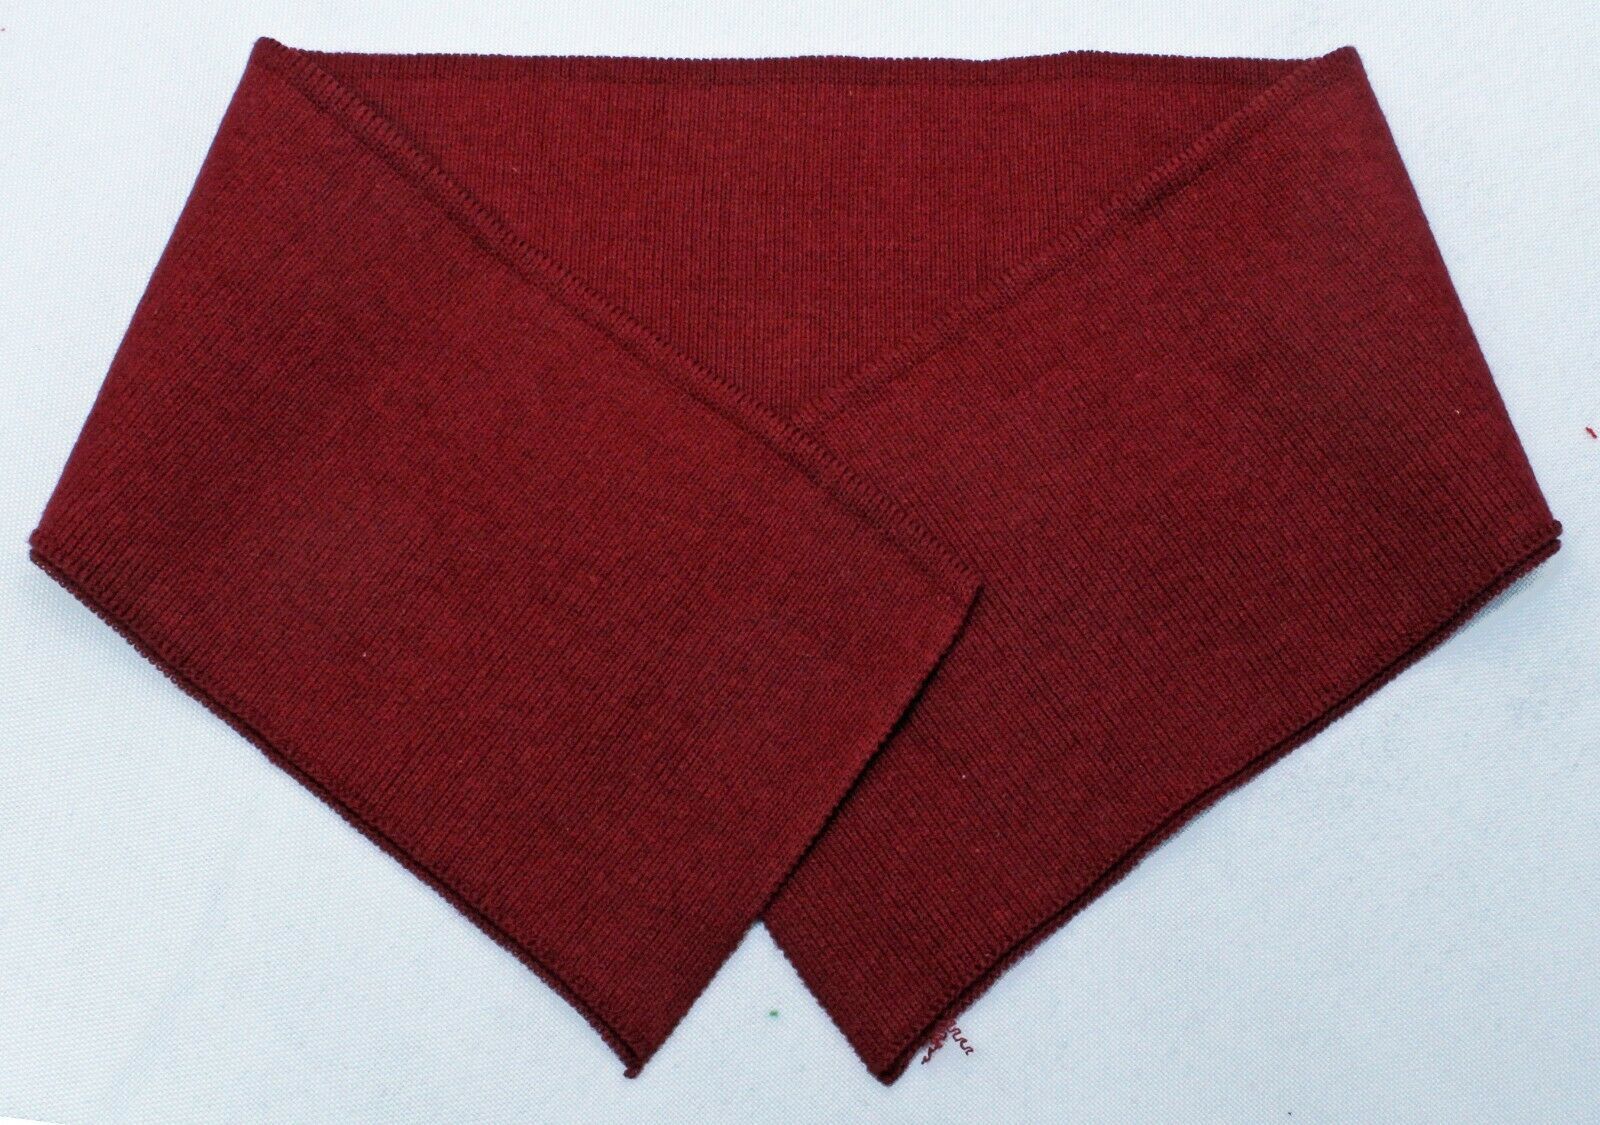 Rugby Knit Shirt Collar - Burgundy 3.5" x 20" Self-Finished Ribbed Trim M516.15 - $3.97